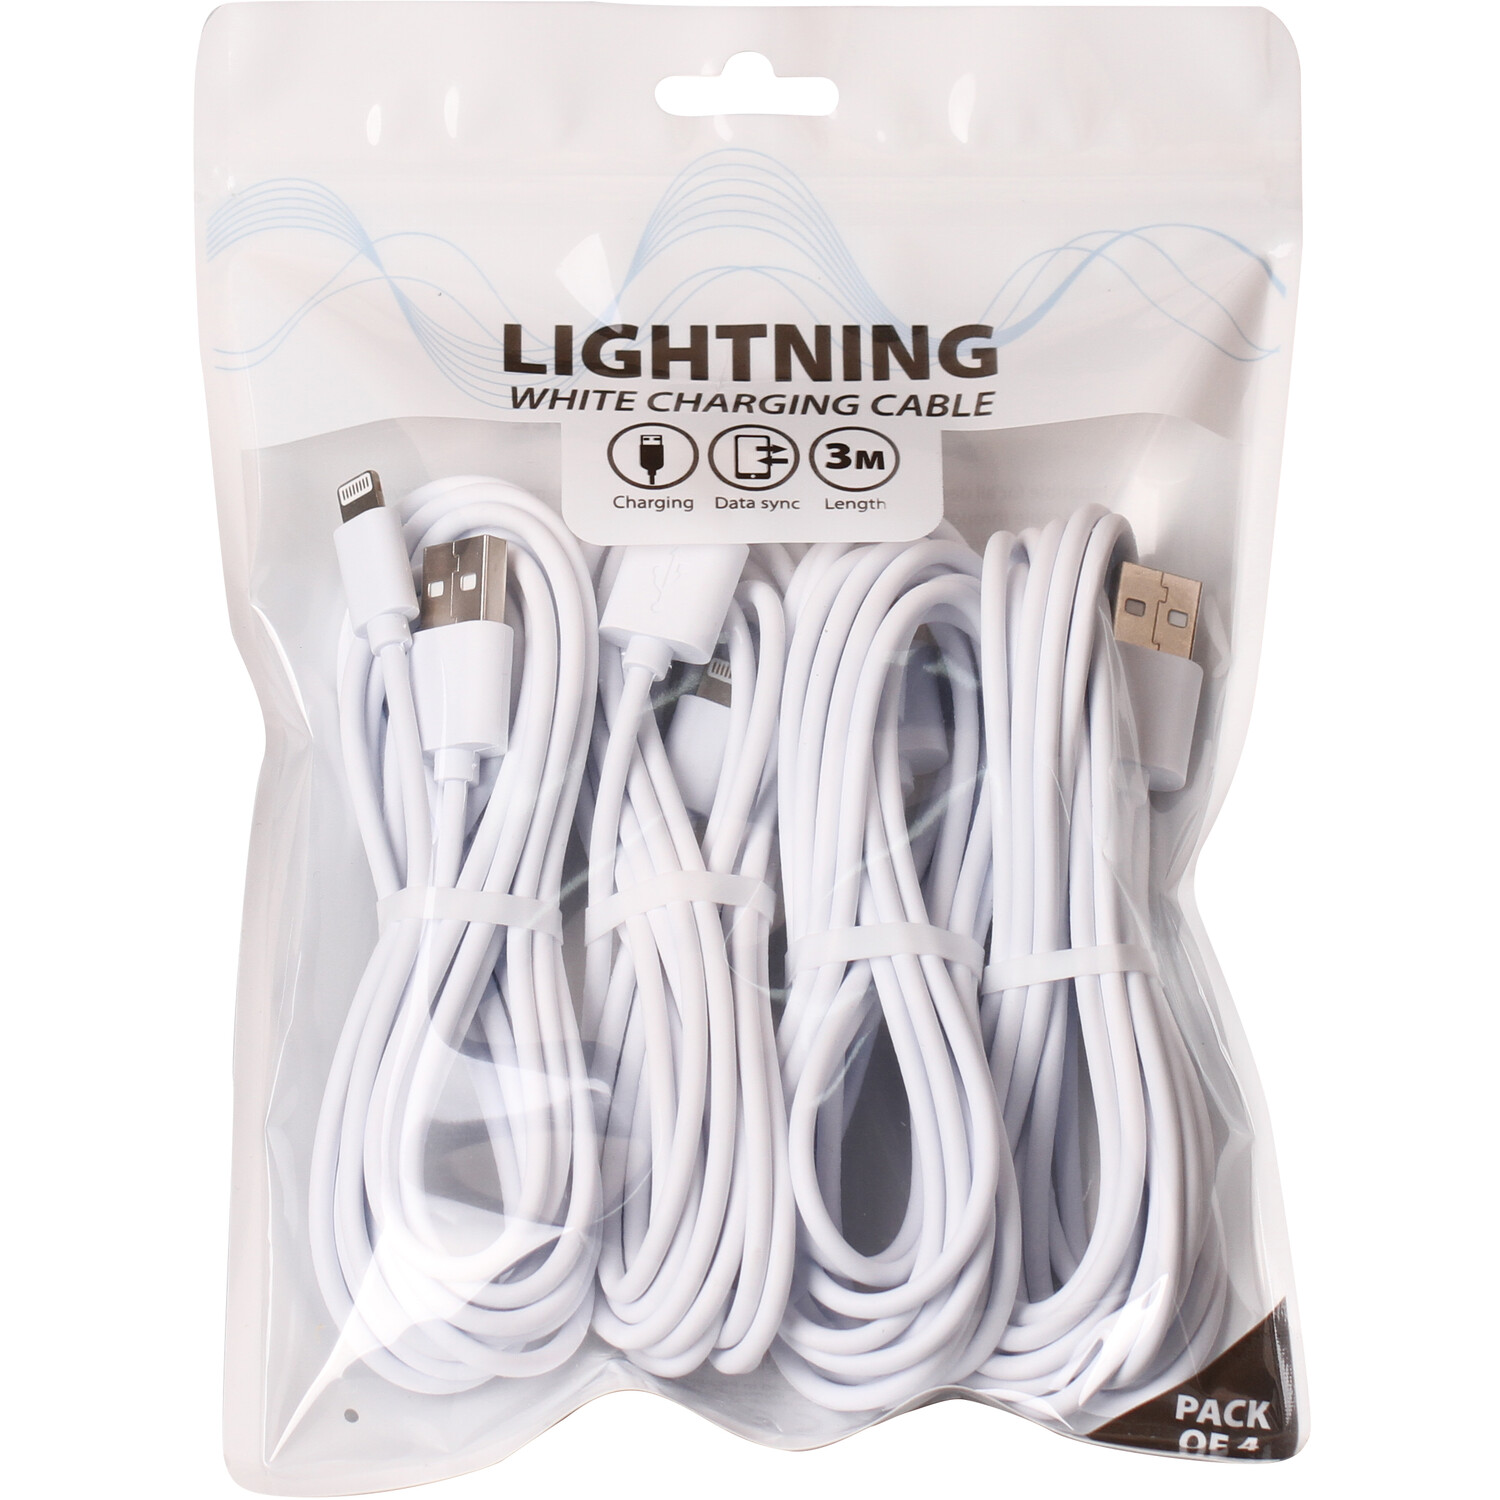 Lightning White Charging Cable 4 Pack Image